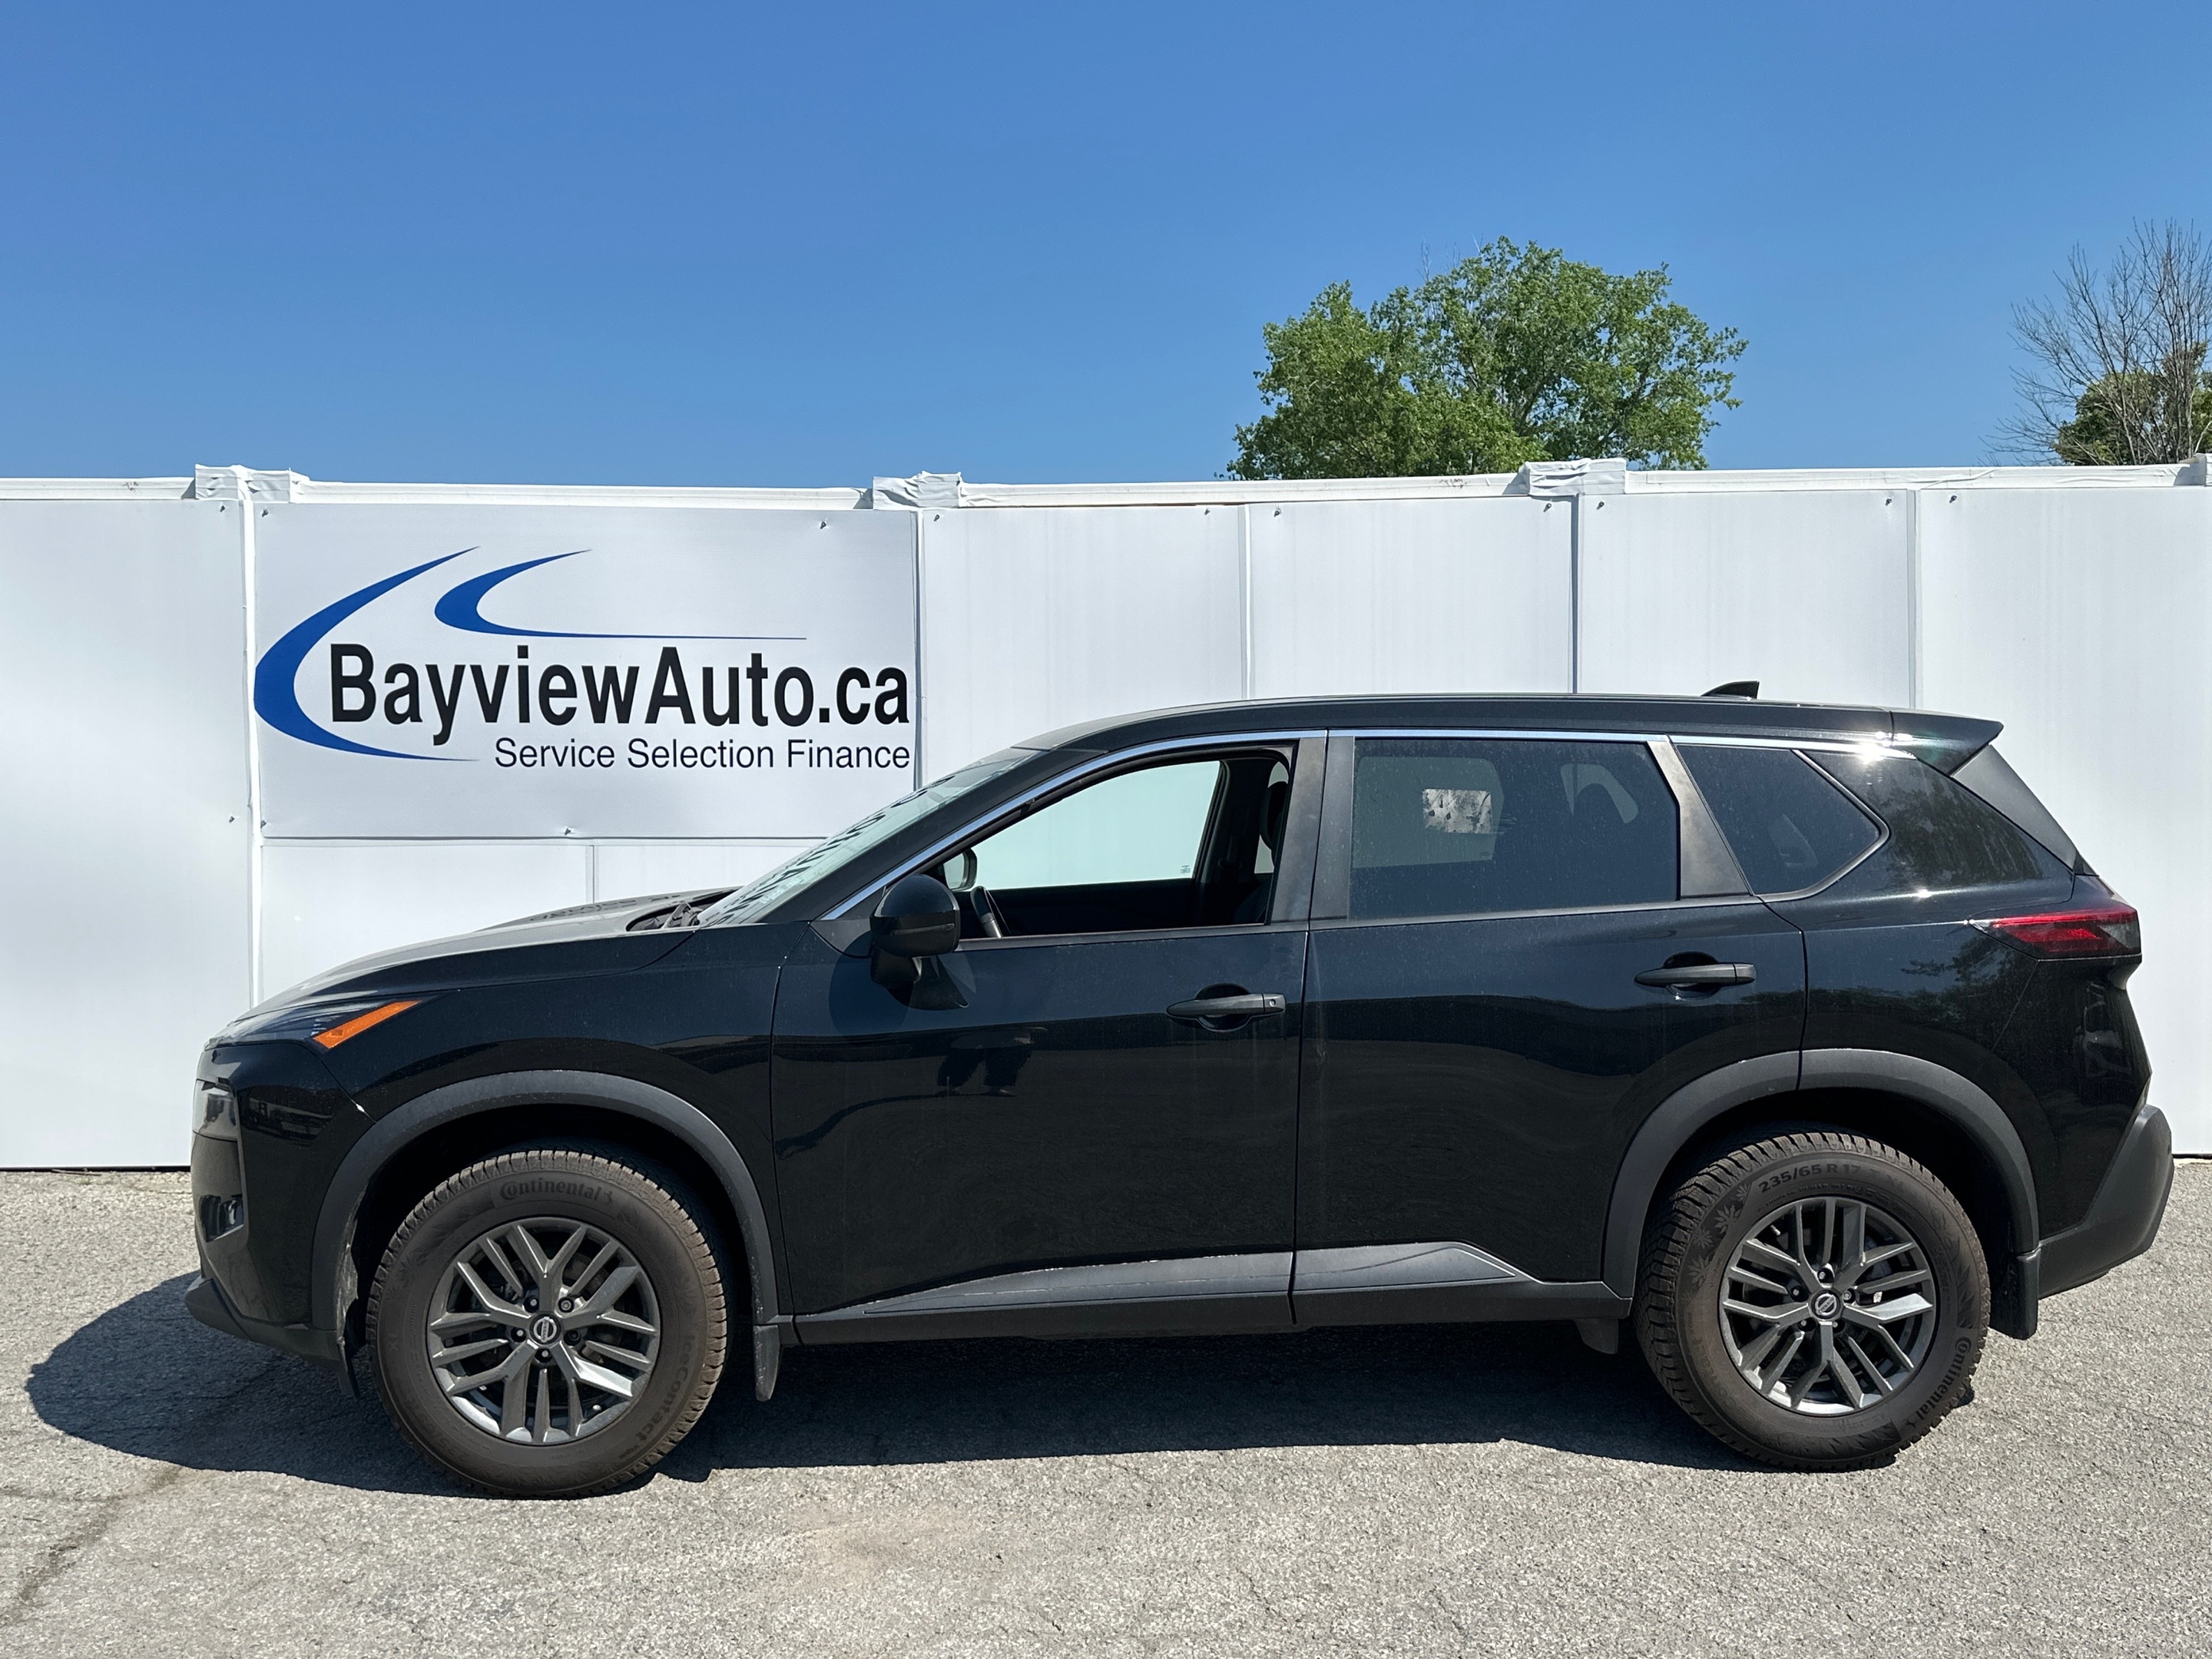 2021 Nissan Rogue S! BLACK! 73KM! ONE OWNER LEASE!